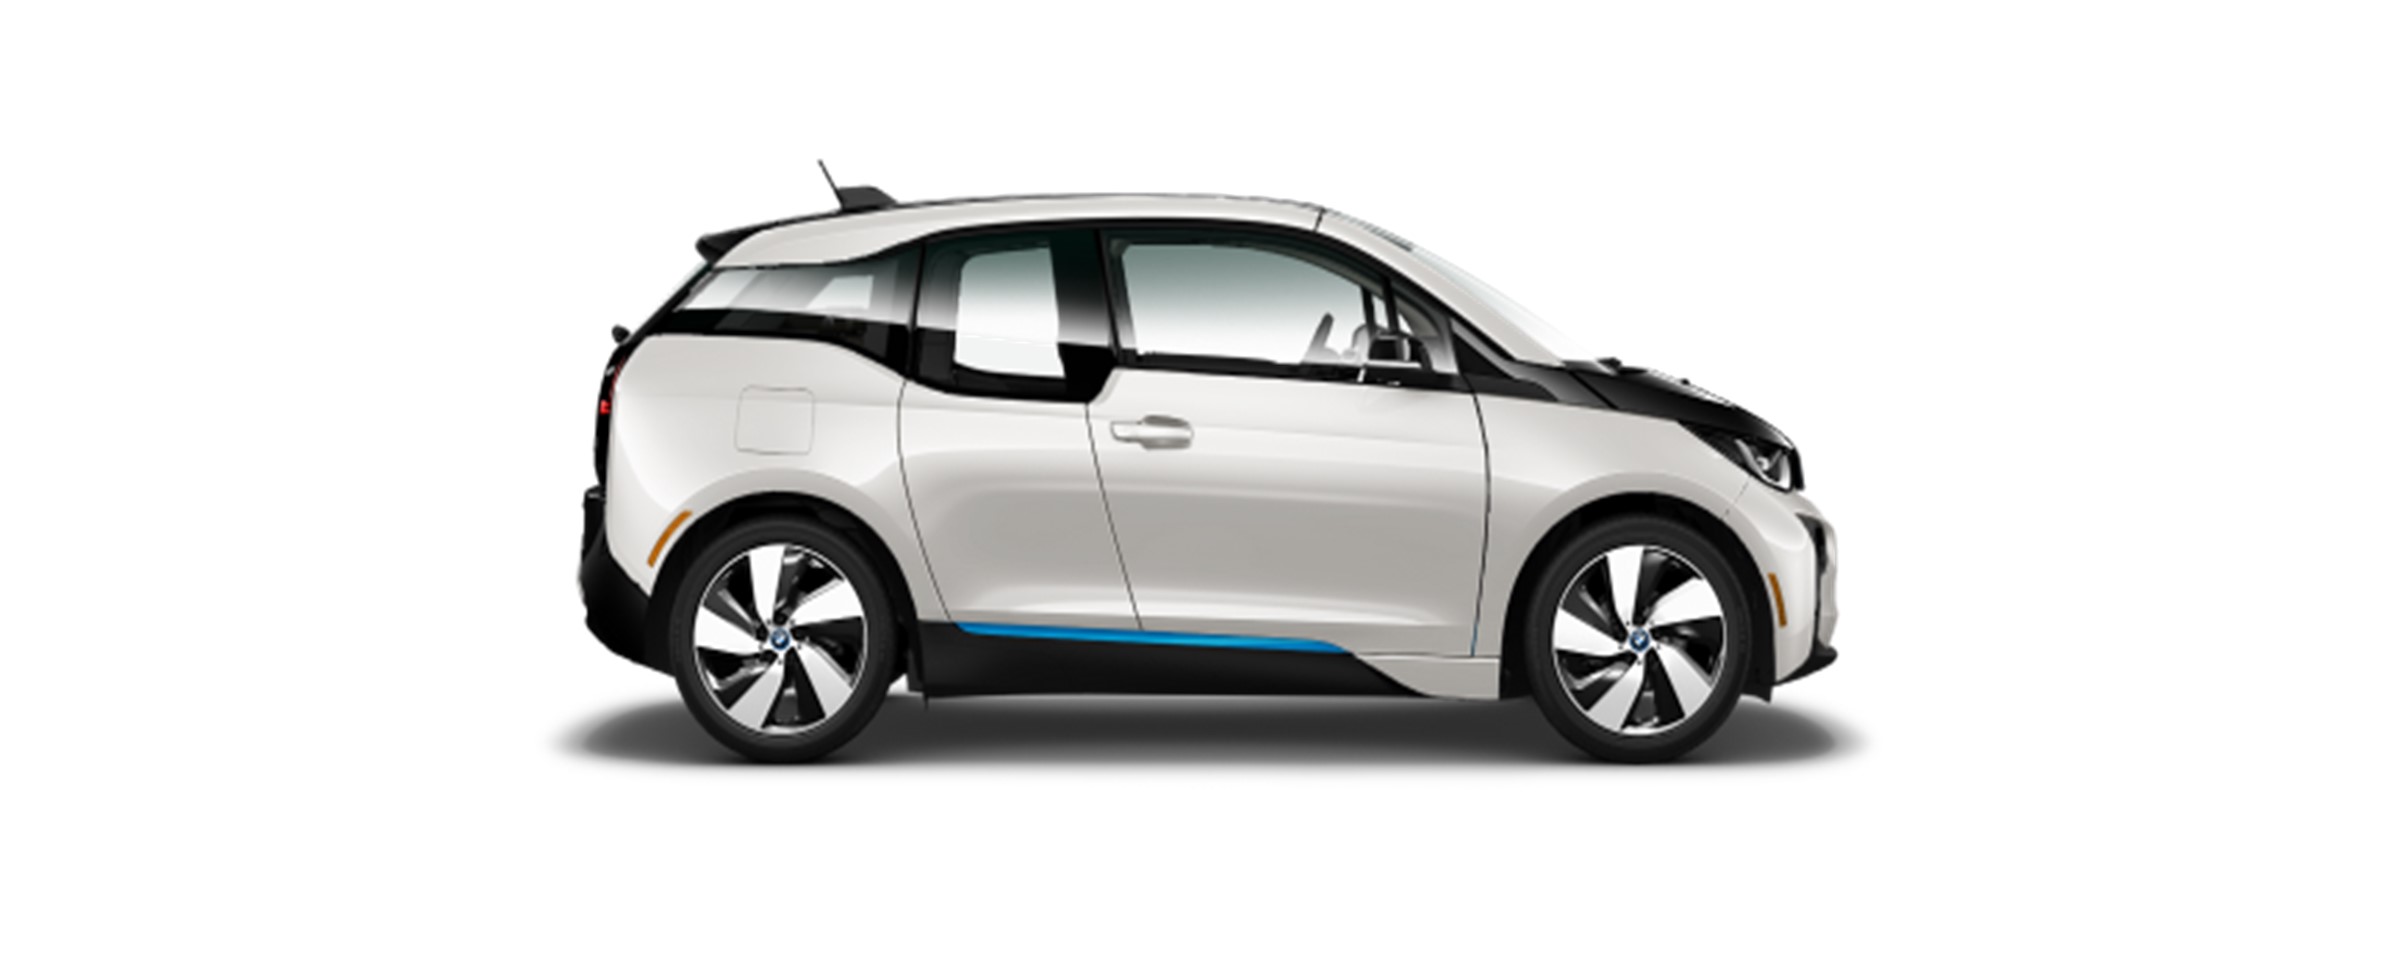 Electric Driving 101 with the BMW i - BMW of Palm Springs Blog